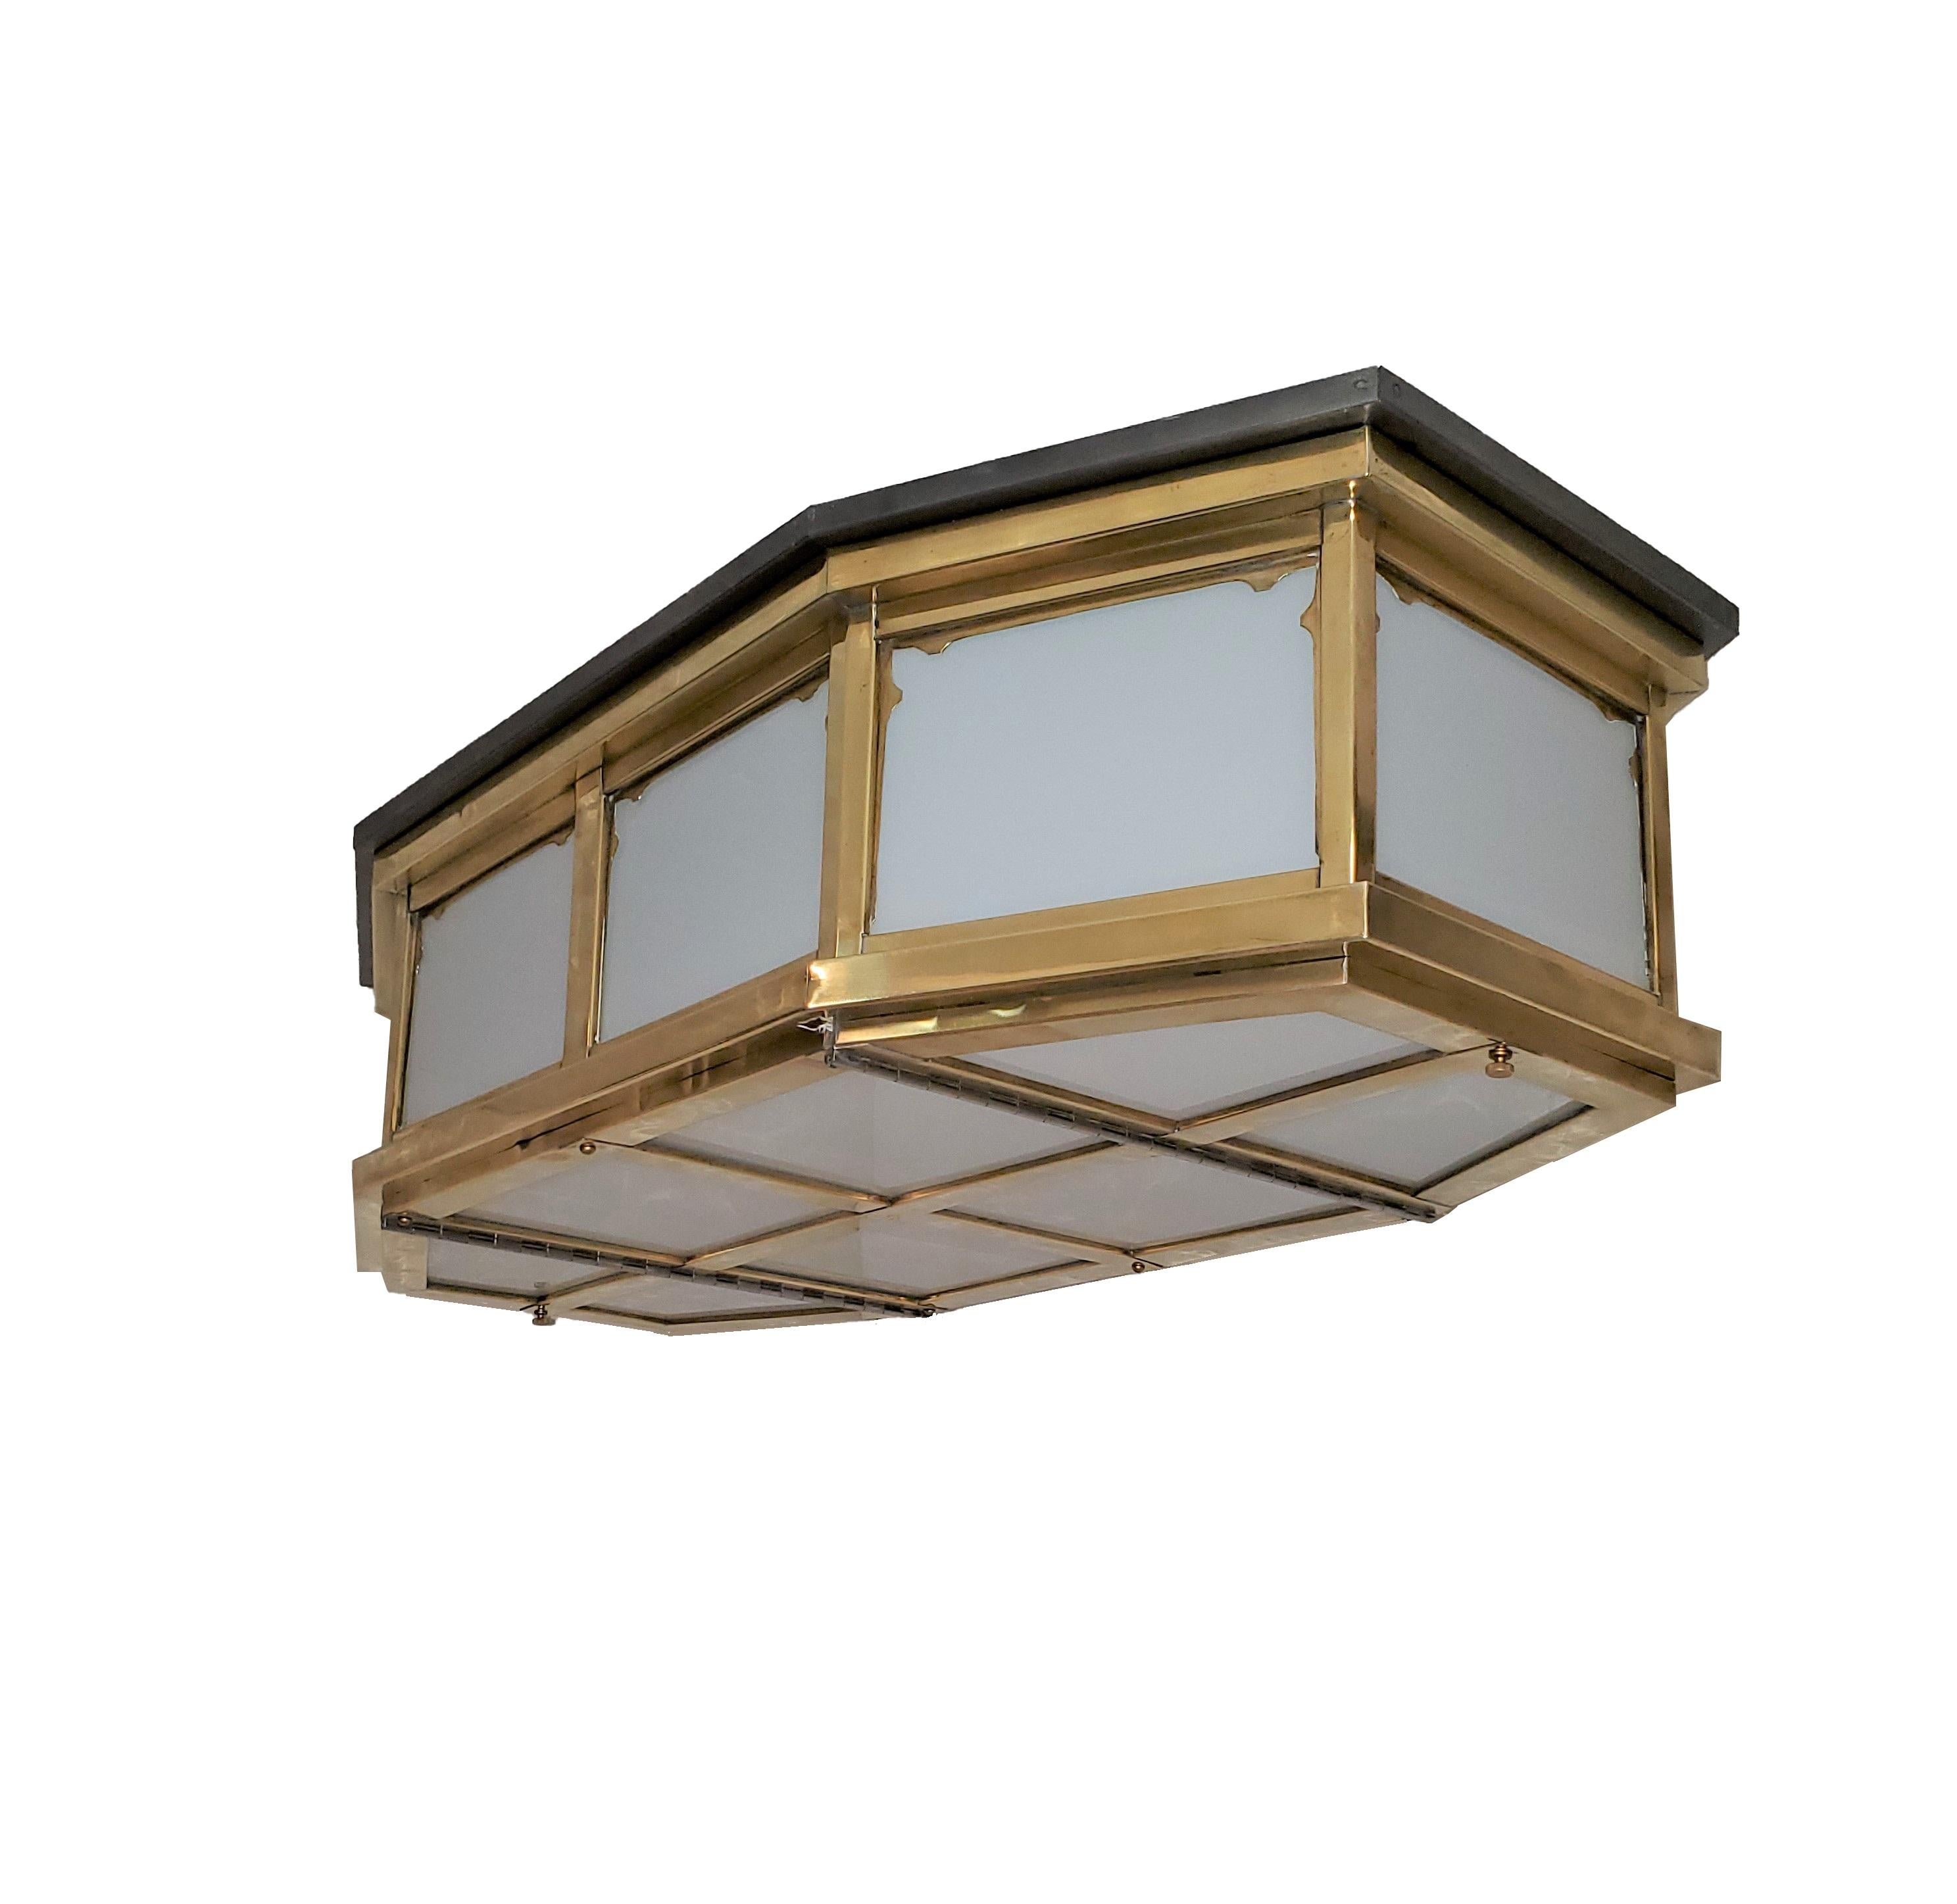 A pair of Industrial, elongated octagonal flush mounted glass fixtures with brass stepped design frame. The eight sided shape features opaque white glass panel insets each circumvented by a decorative frame surround and ending with a grid like,